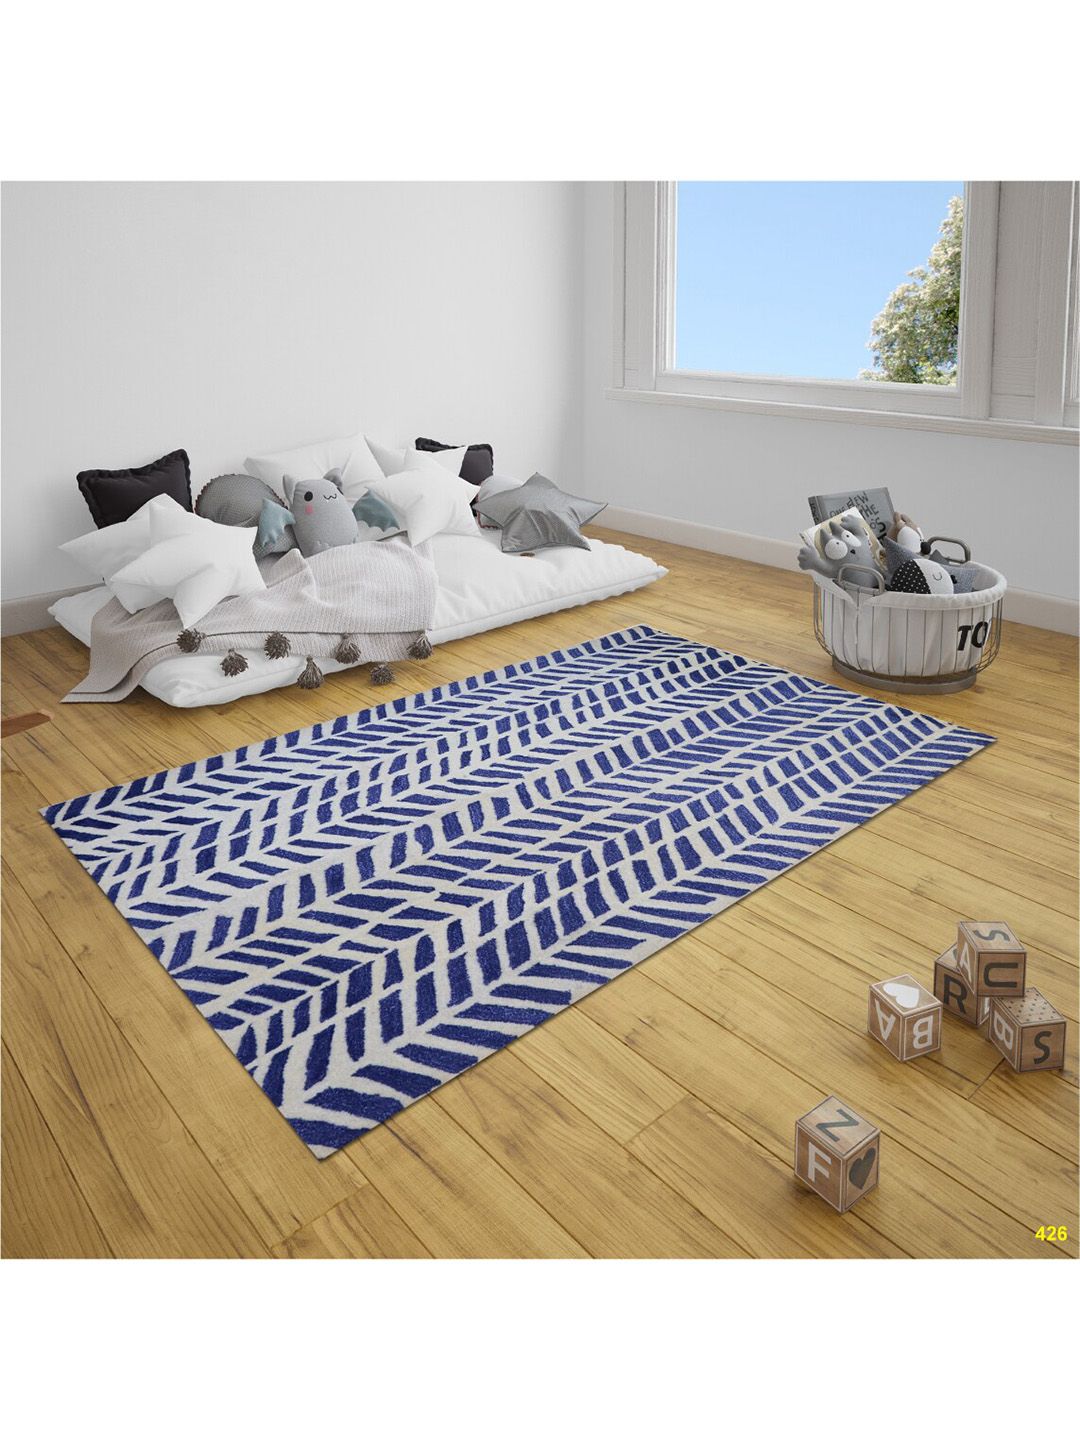 SANDED EDGE Blue Striped Wool Hand-Tuft Carpet Price in India